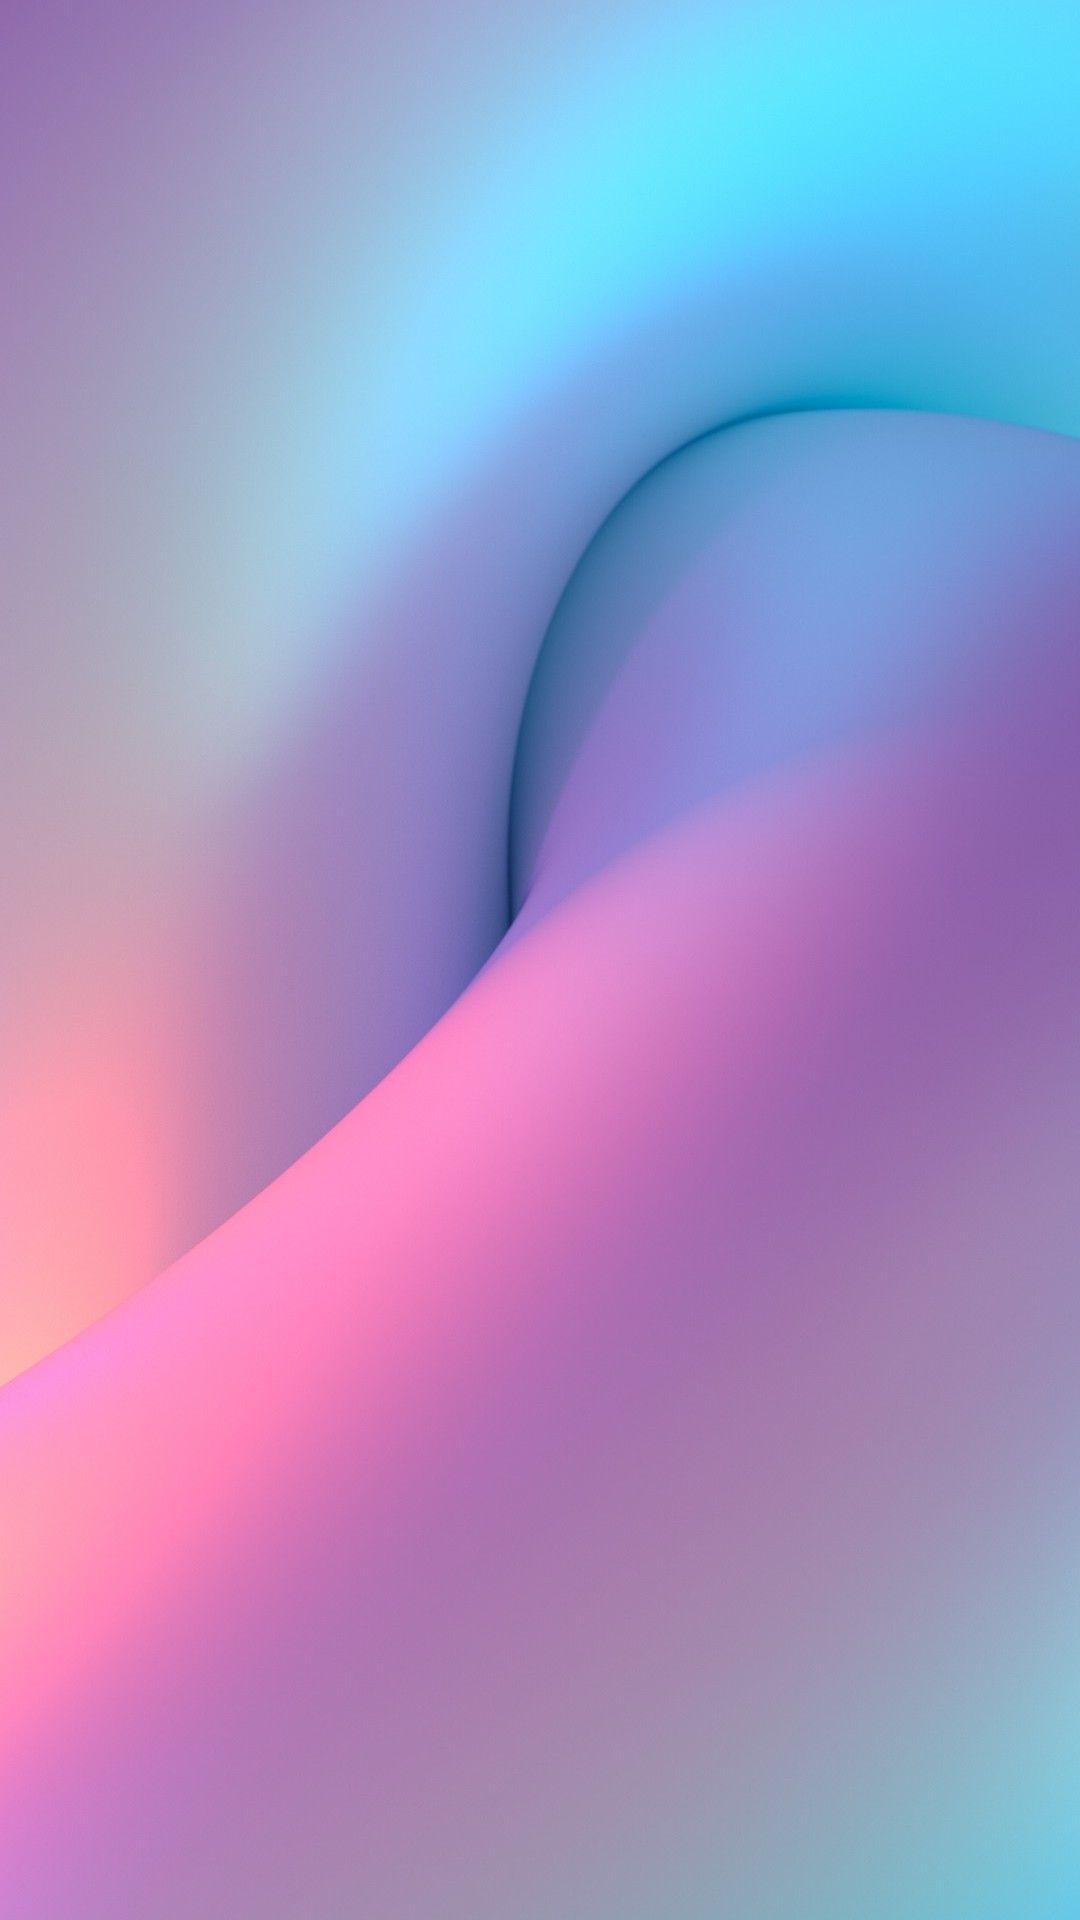 Soft to see more latest #iOS12 stock wallpaper